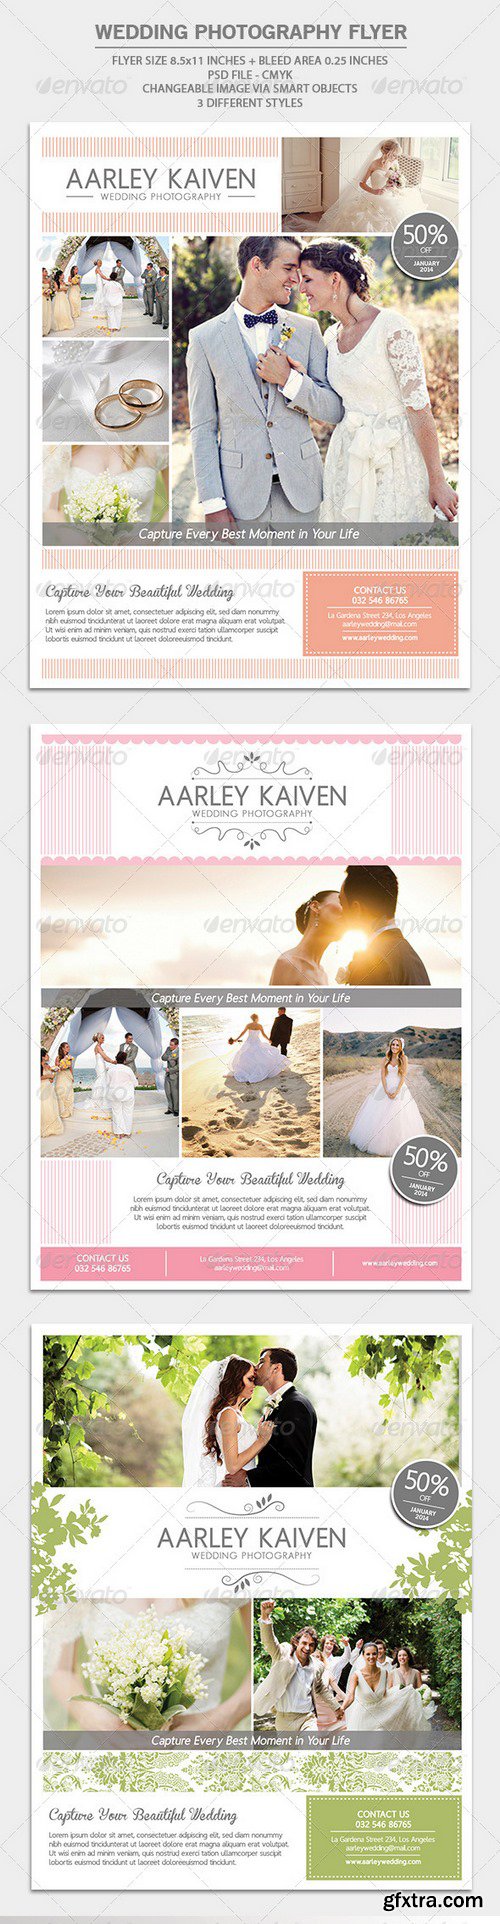 Graphicriver - Wedding Photography Flyer 7135416